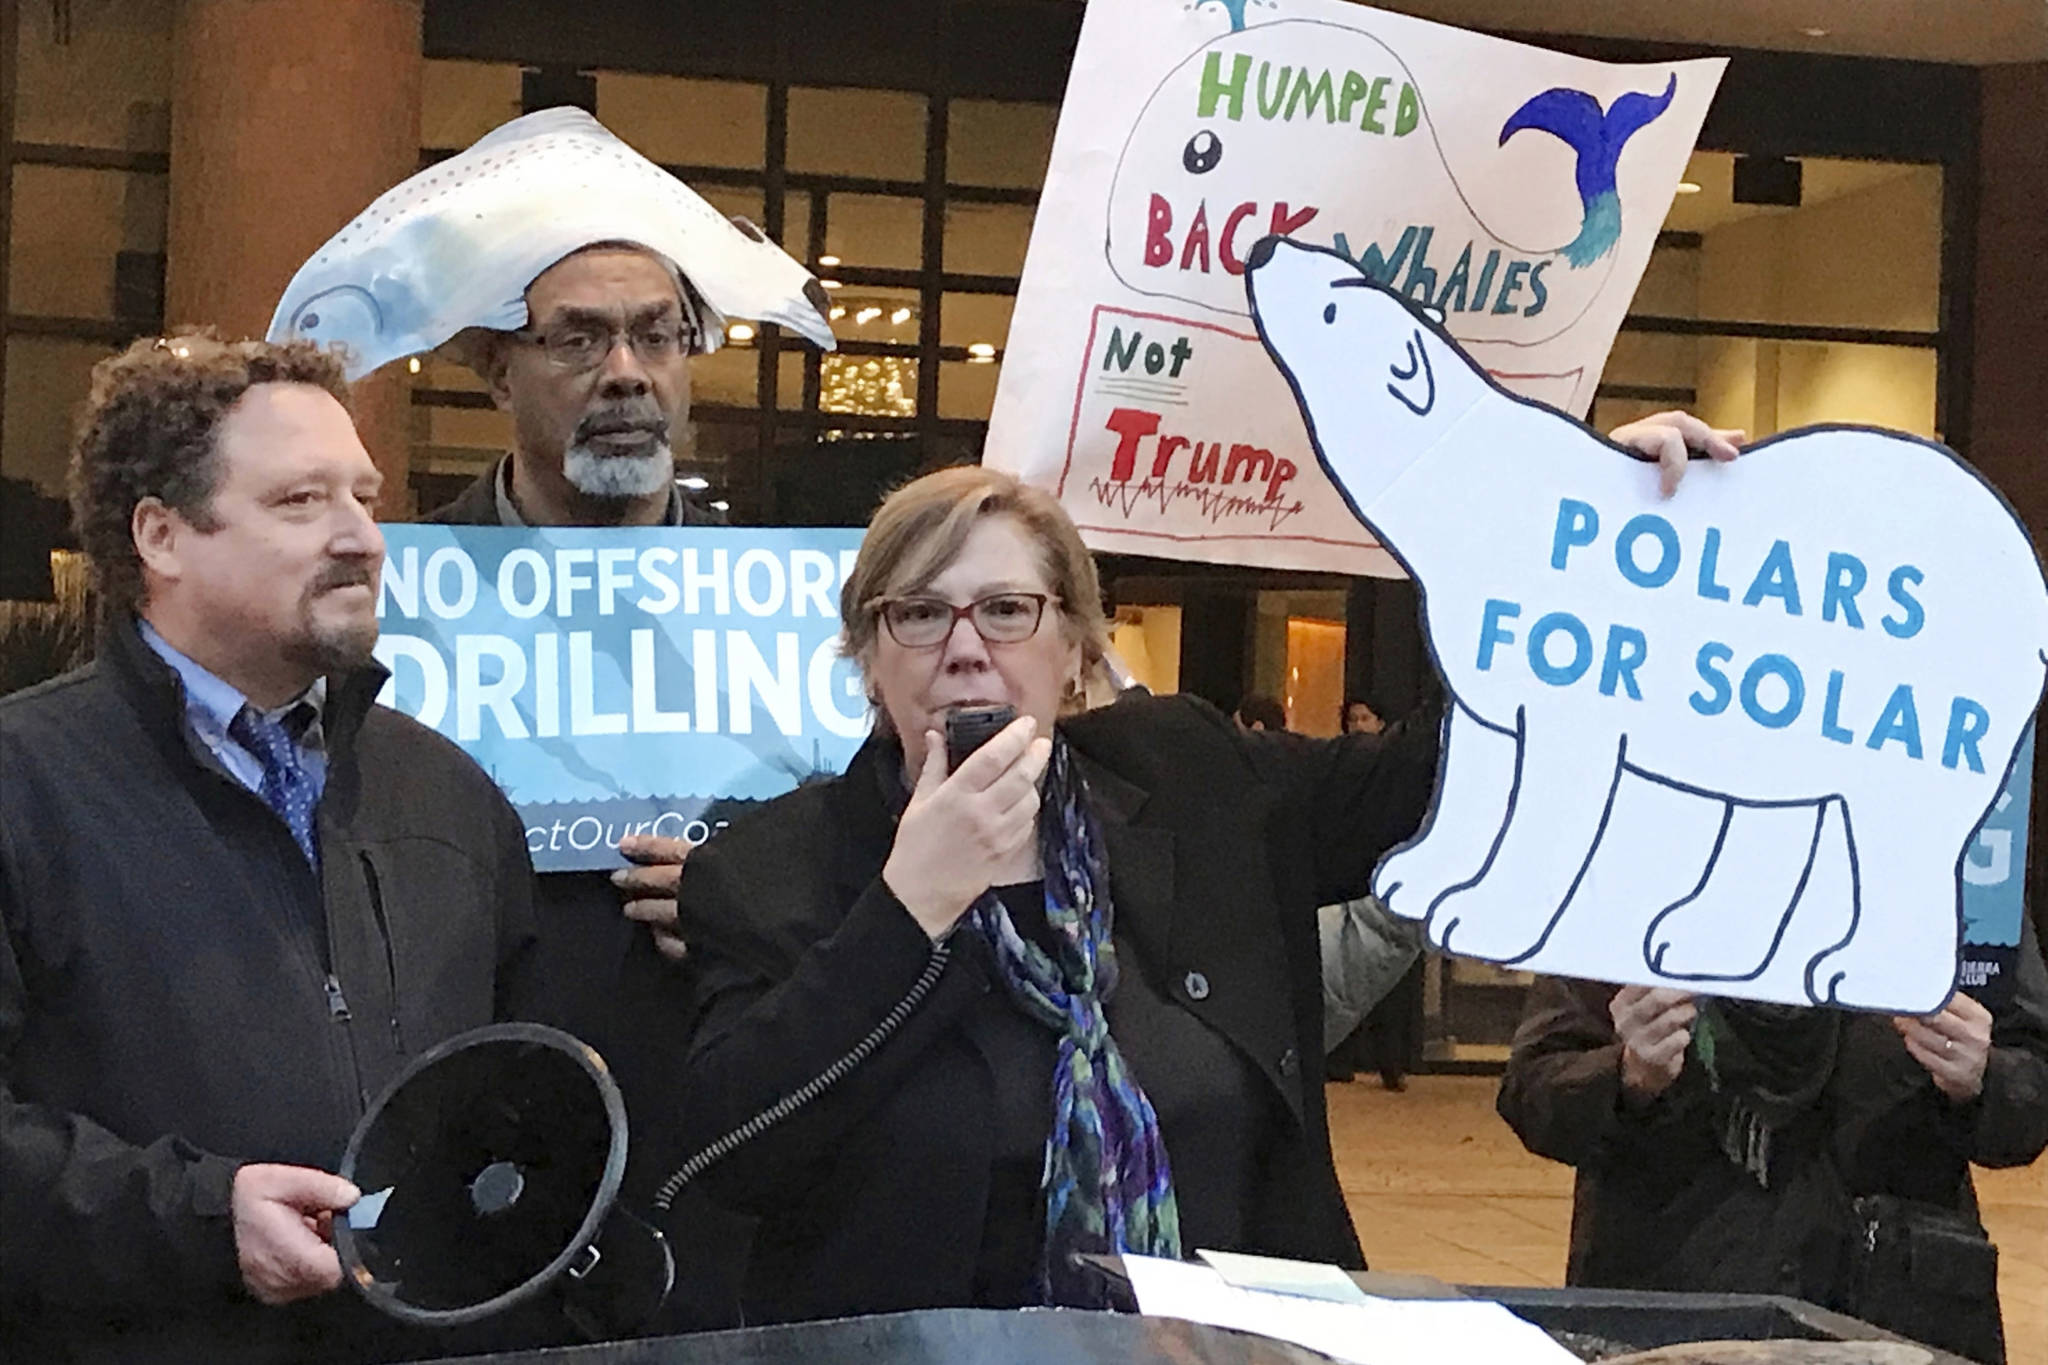 In this Feb. 15, 2018 file photo, Judith Enck, center, former regional administrator for the Environmental Protection Agency addresses those gathered at a protest against President Trump’s plan to expand offshore drilling for oil and gas in Albany, N.Y. A U.S. judge in Alaska says President Donald Trump exceeded his authority when he reversed a ban on offshore drilling in vast parts of the Arctic Ocean and dozens of canyons in the Atlantic Ocean. Judge Sharon Gleason in a ruling late Friday, March 29, 2019 threw out Trump‚Äôs executive order that overturned the ban implemented by President Barack Obama.(AP Photo/David Klepper, File)